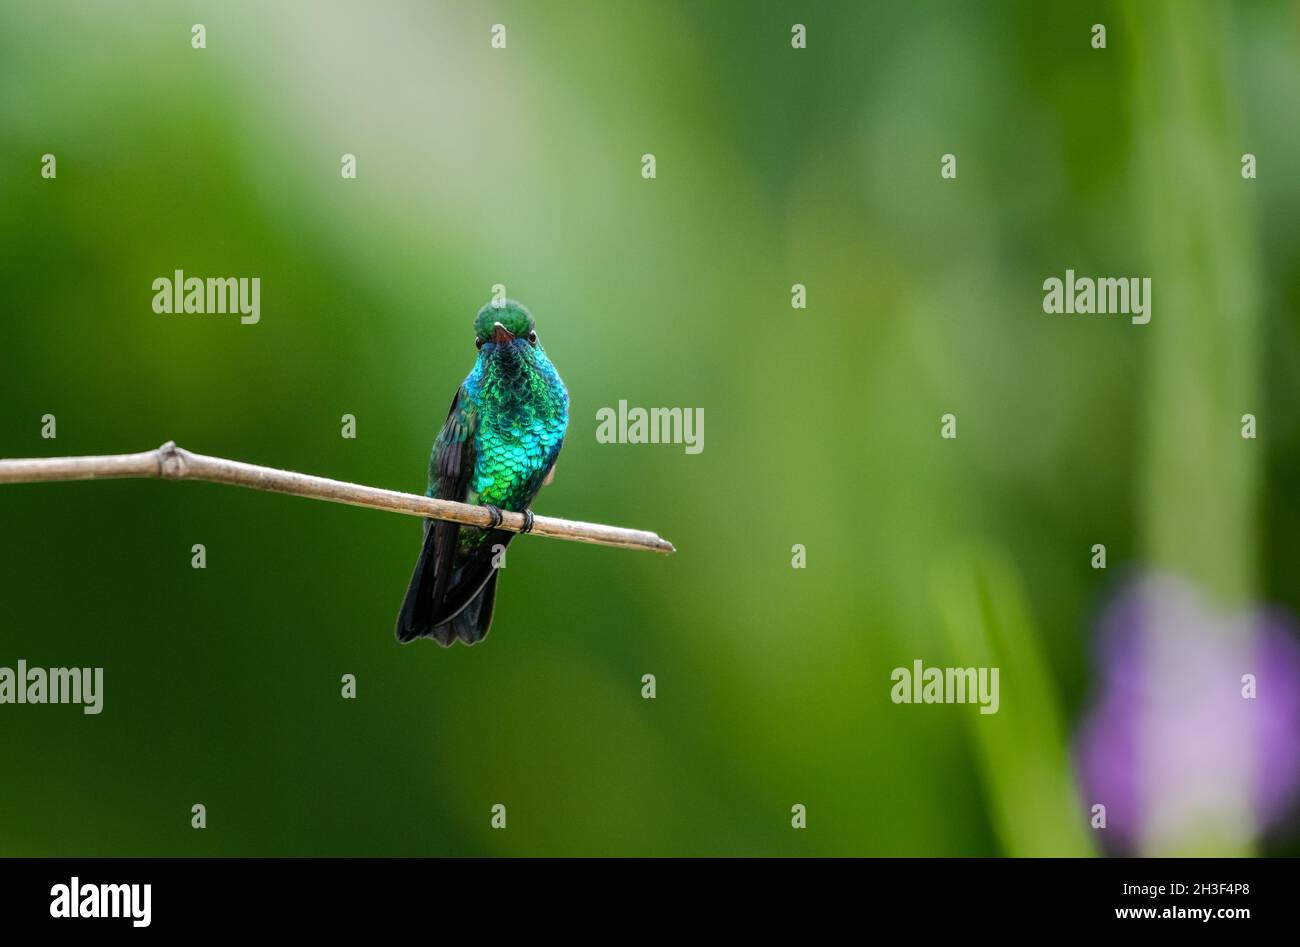 The brilliant and glittering male Blue-chinned Sapphire hummingbird, Chlorestes notata, with light shining through blurred foliage. Stock Photo